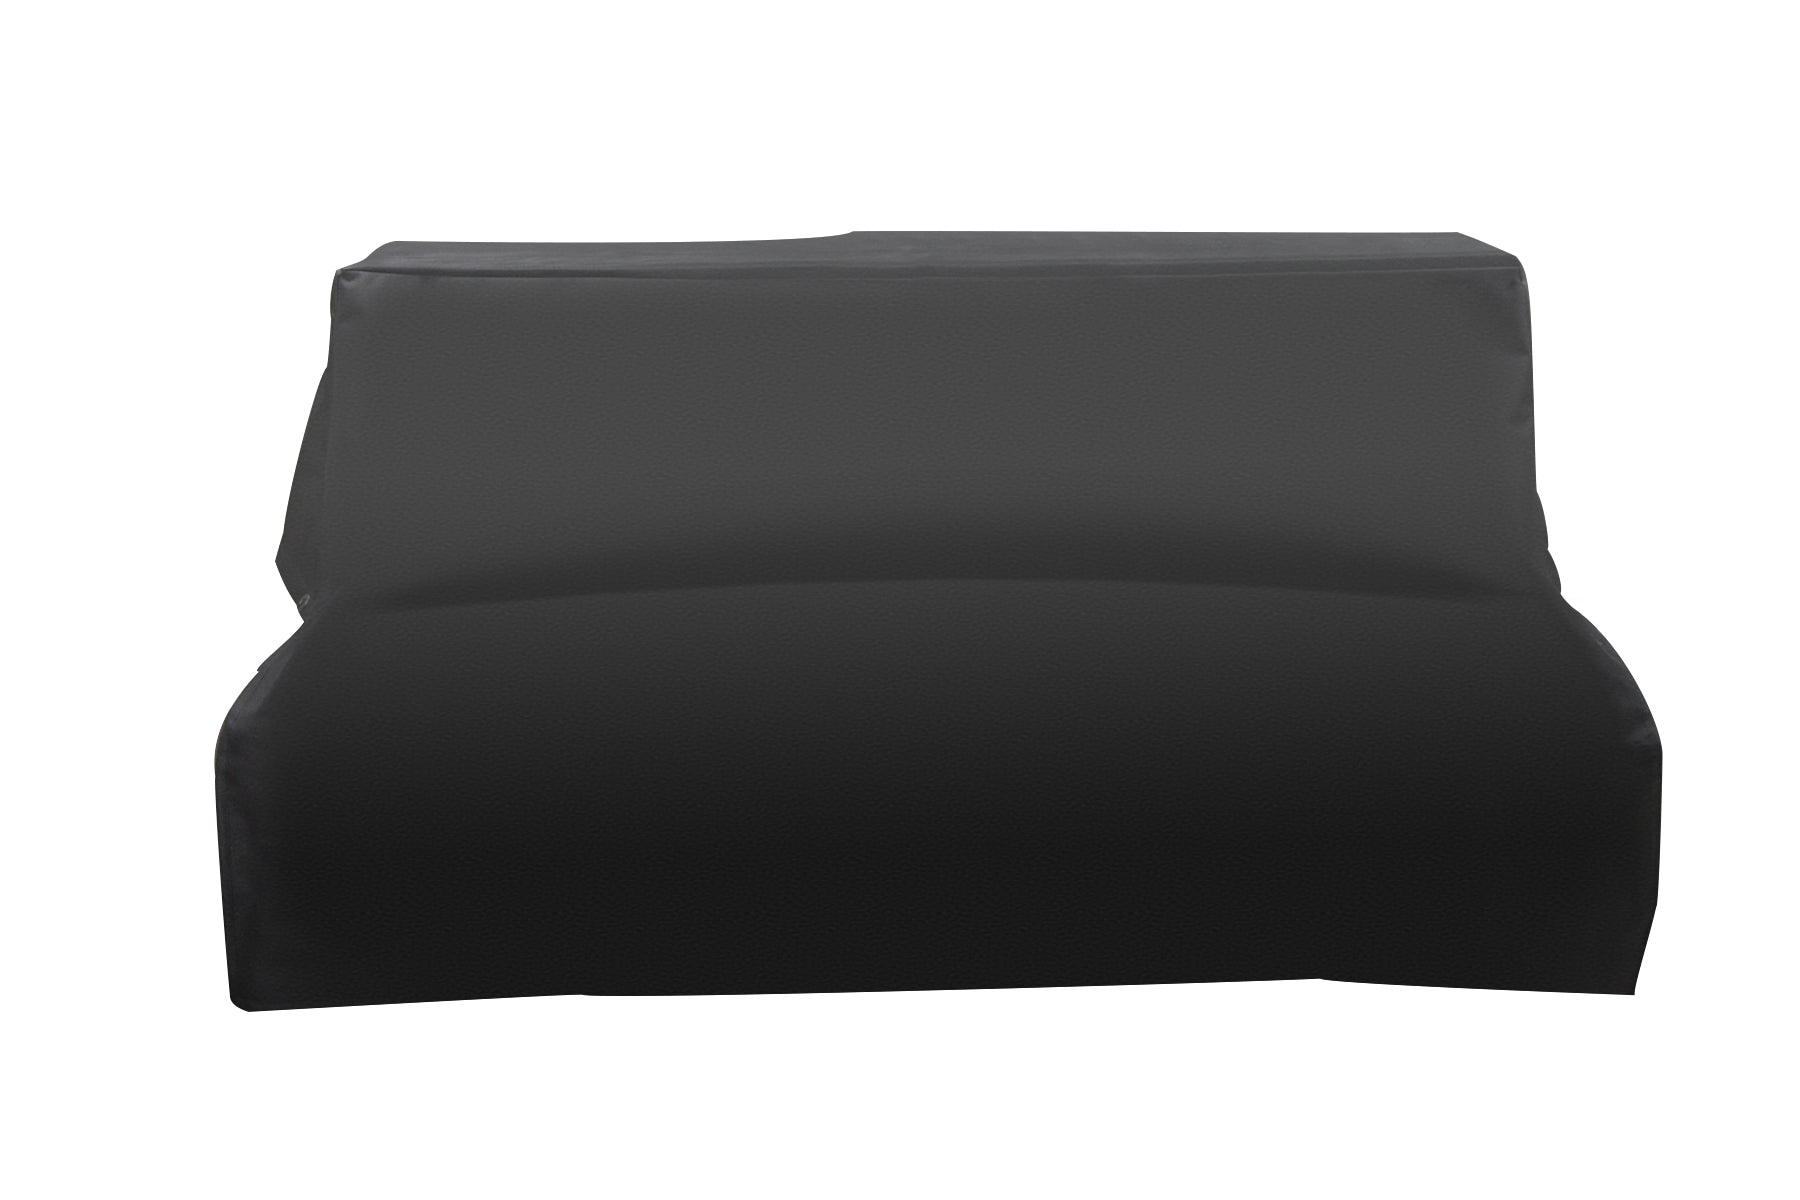 Alturi 42" Built-In Deluxe Grill Cover